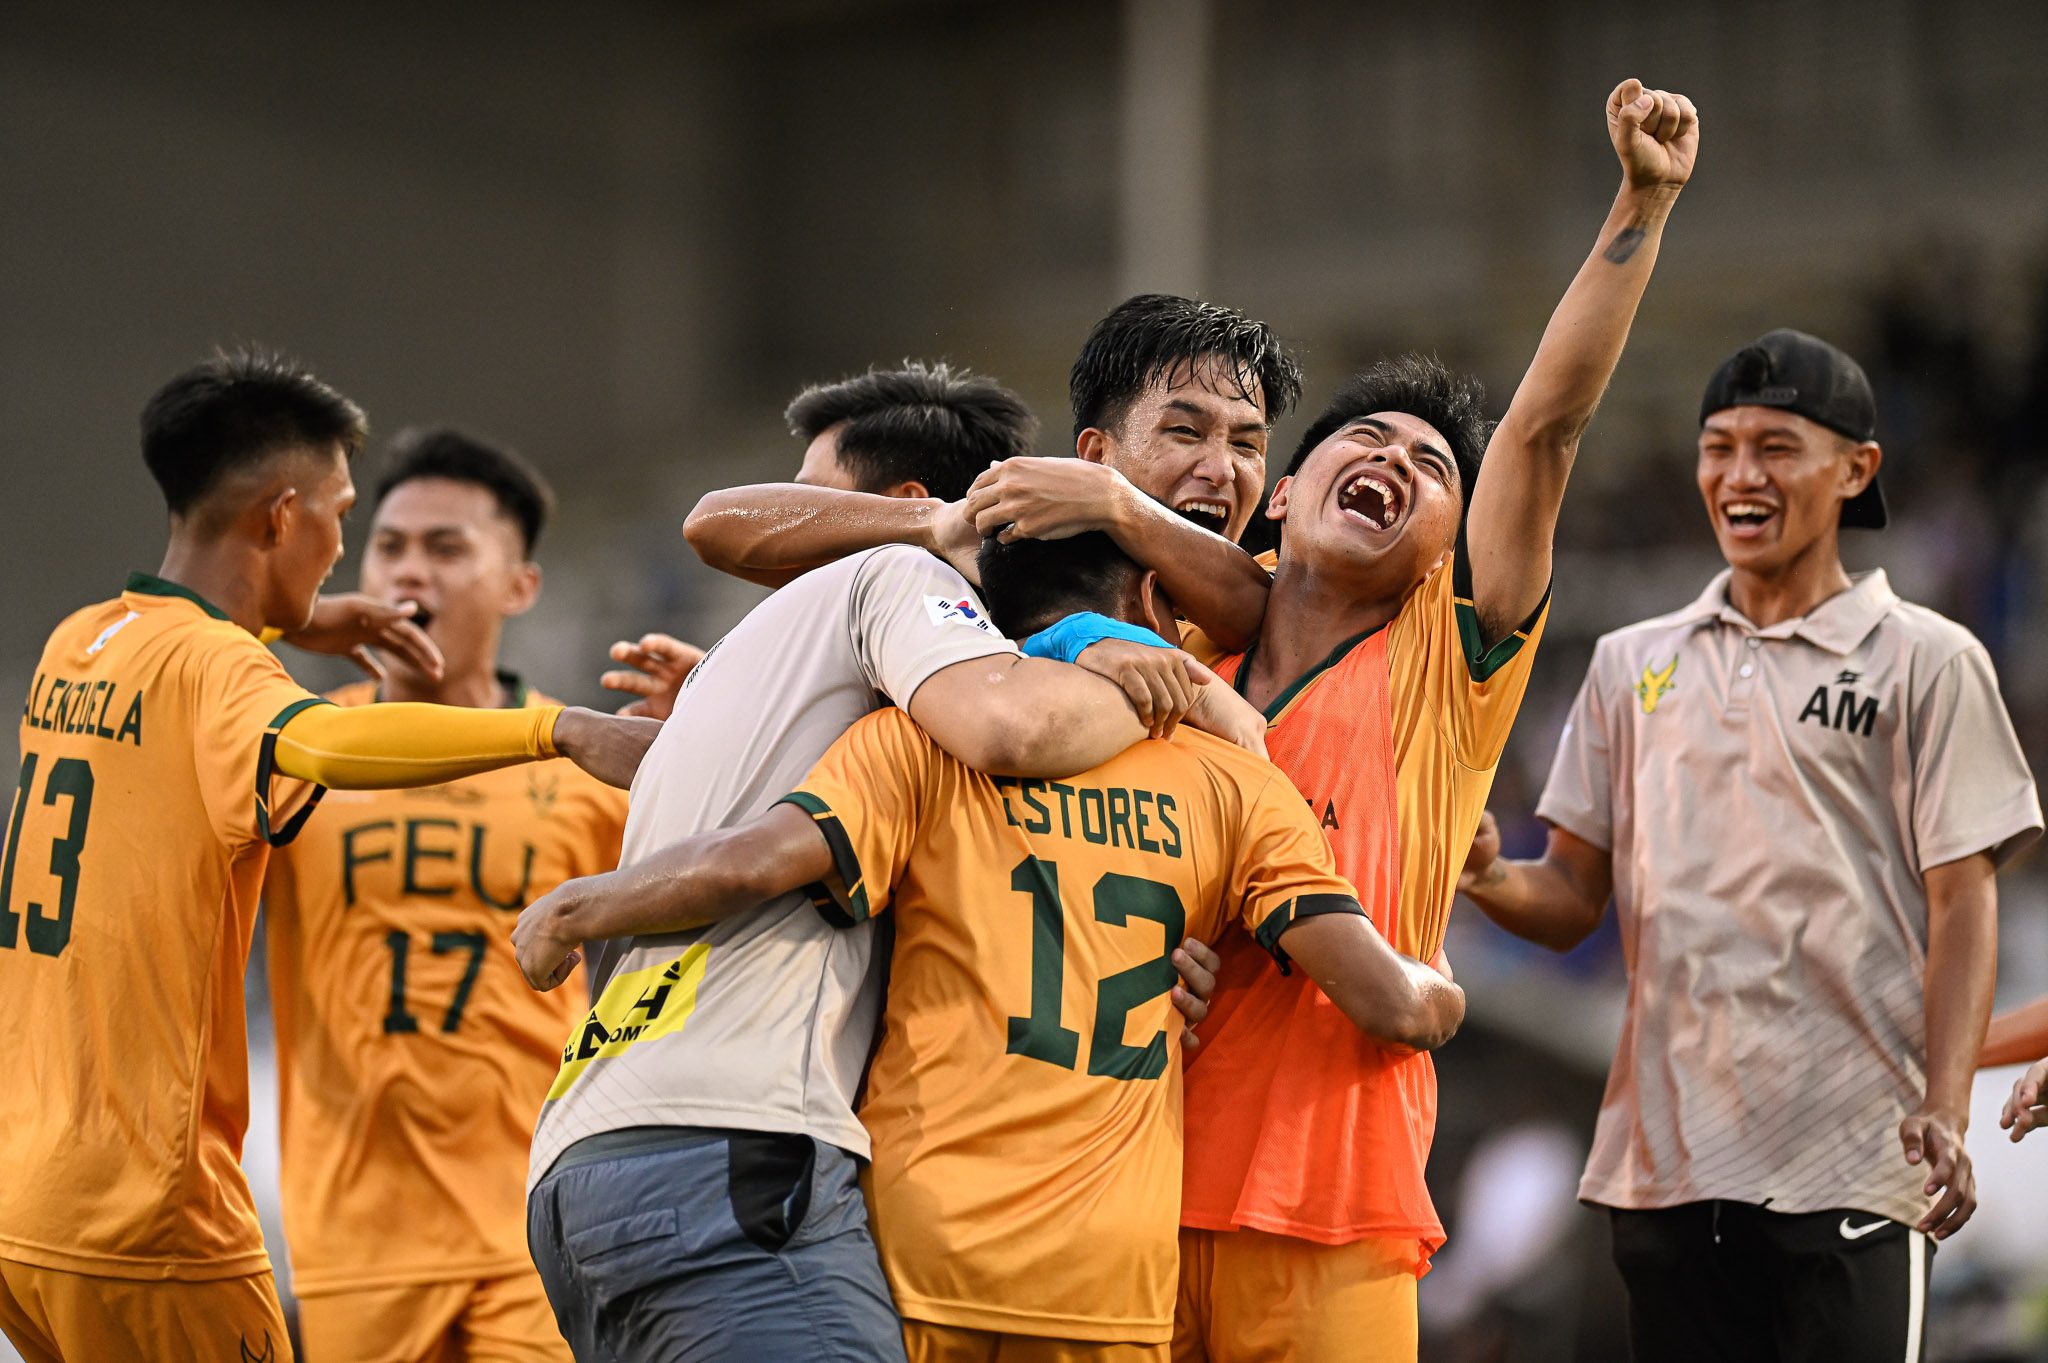 FEU reclaims UAAP men’s football crown after 8 years